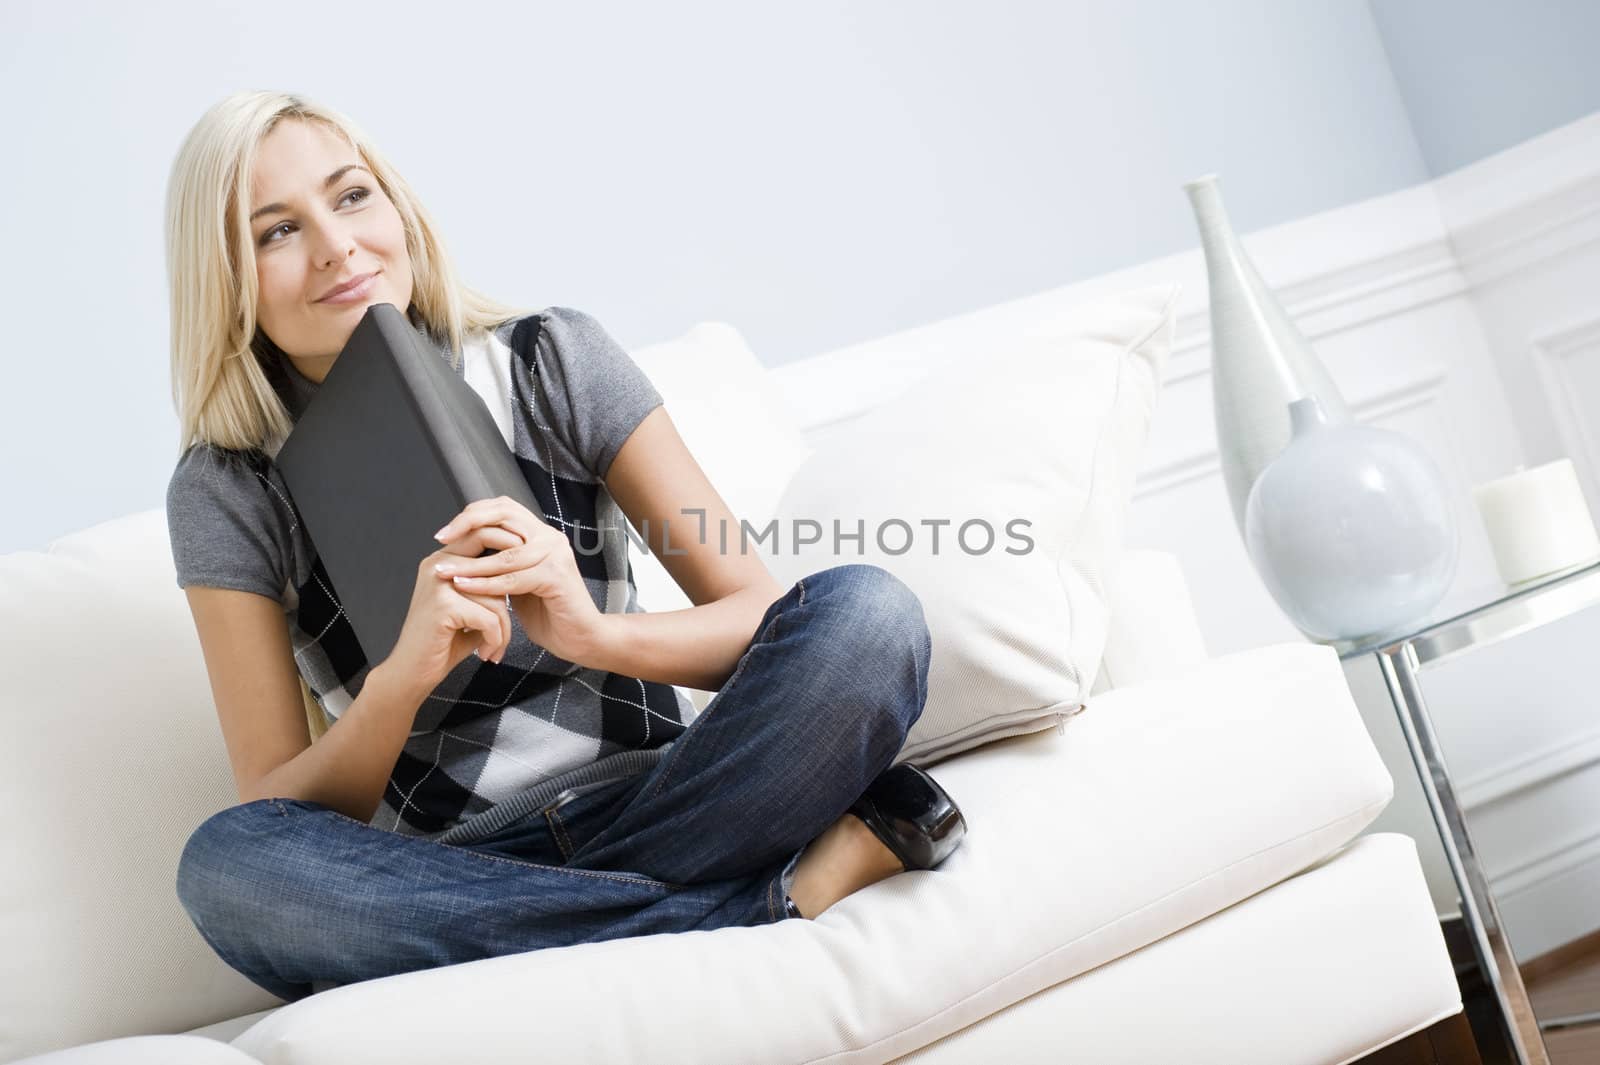 Smiling Woman Sitting on Couch and Holding a Book by cardmaverick